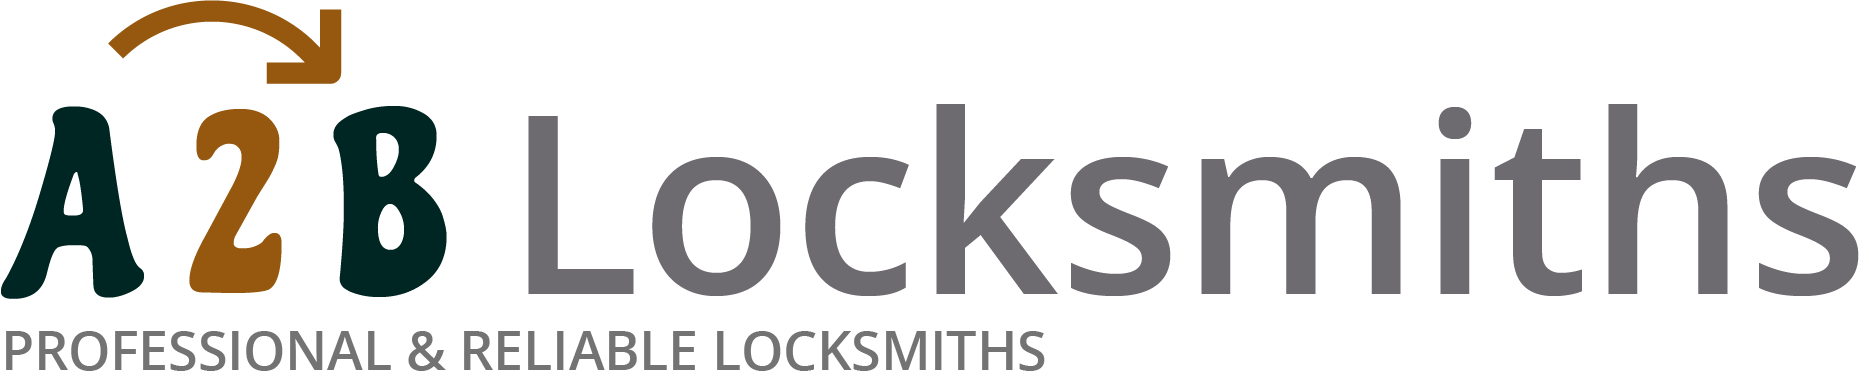 If you are locked out of house in Thorpe, our 24/7 local emergency locksmith services can help you.